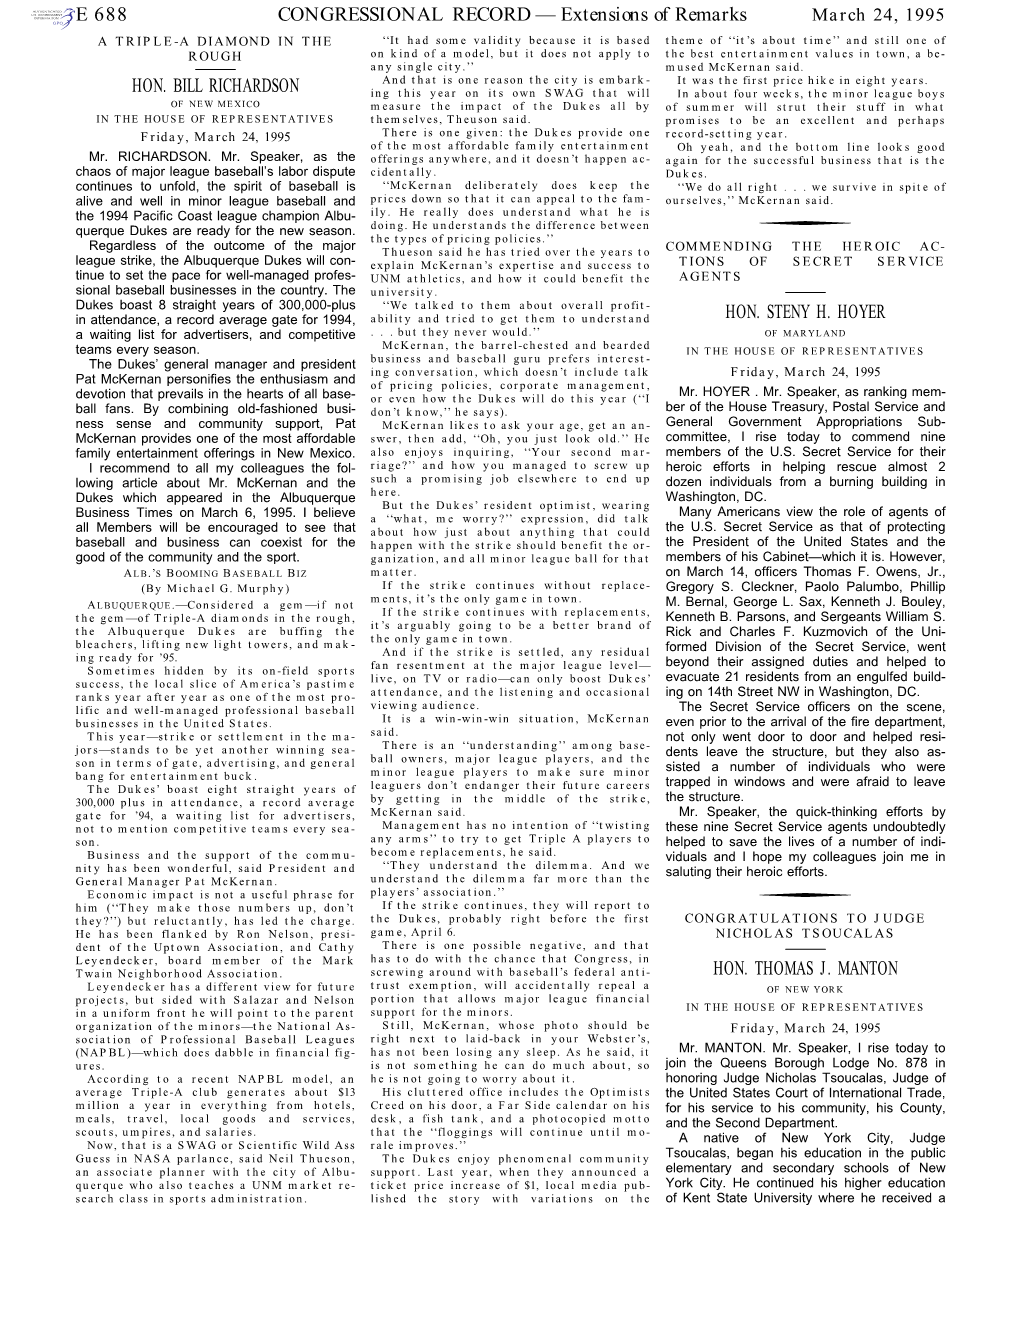 CONGRESSIONAL RECORD— Extensions of Remarks E 688 HON